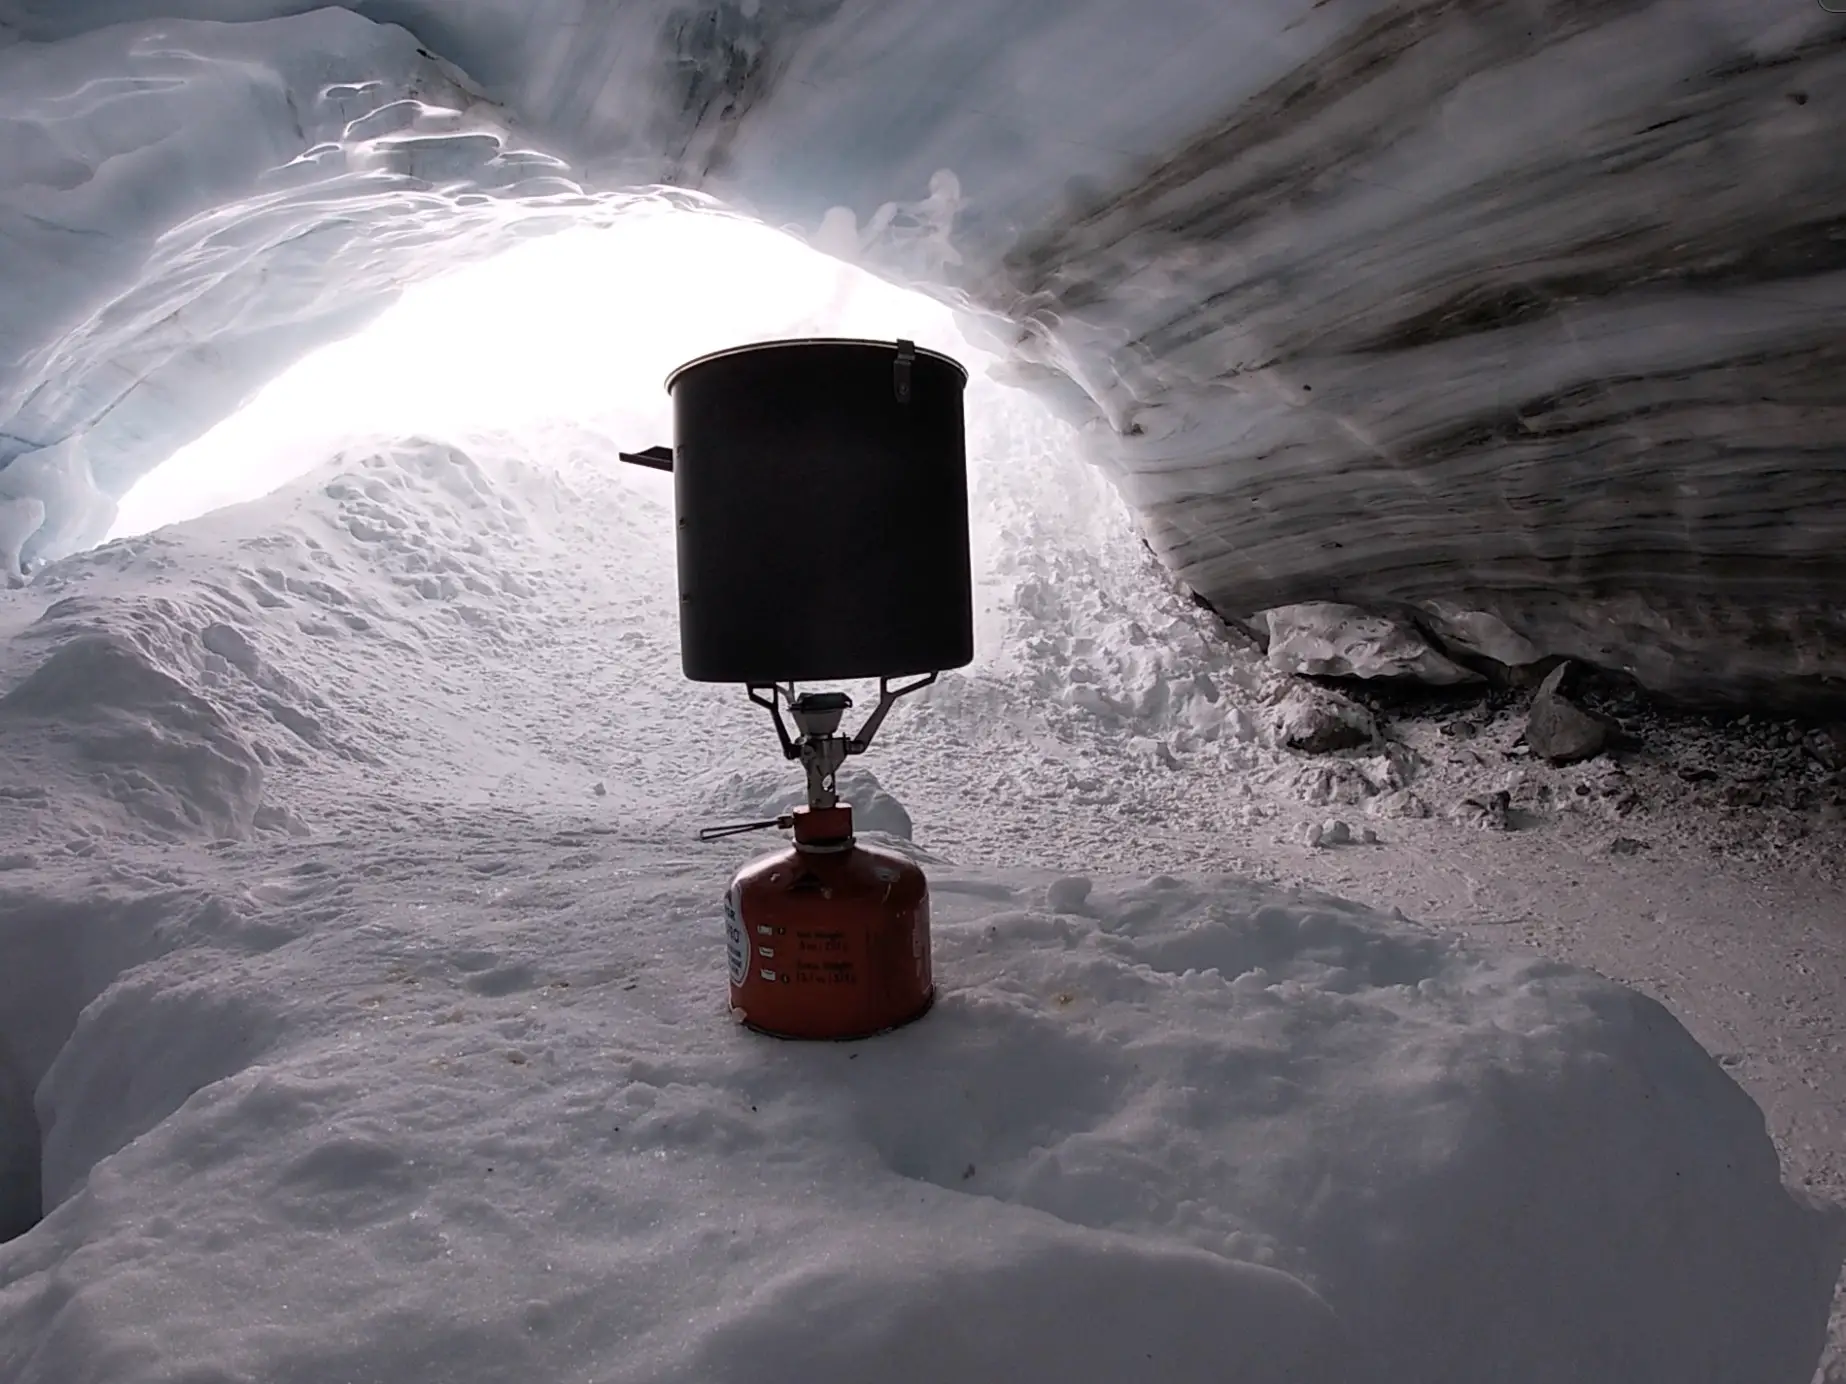 MSR pocket rocket stove in the ice cave 